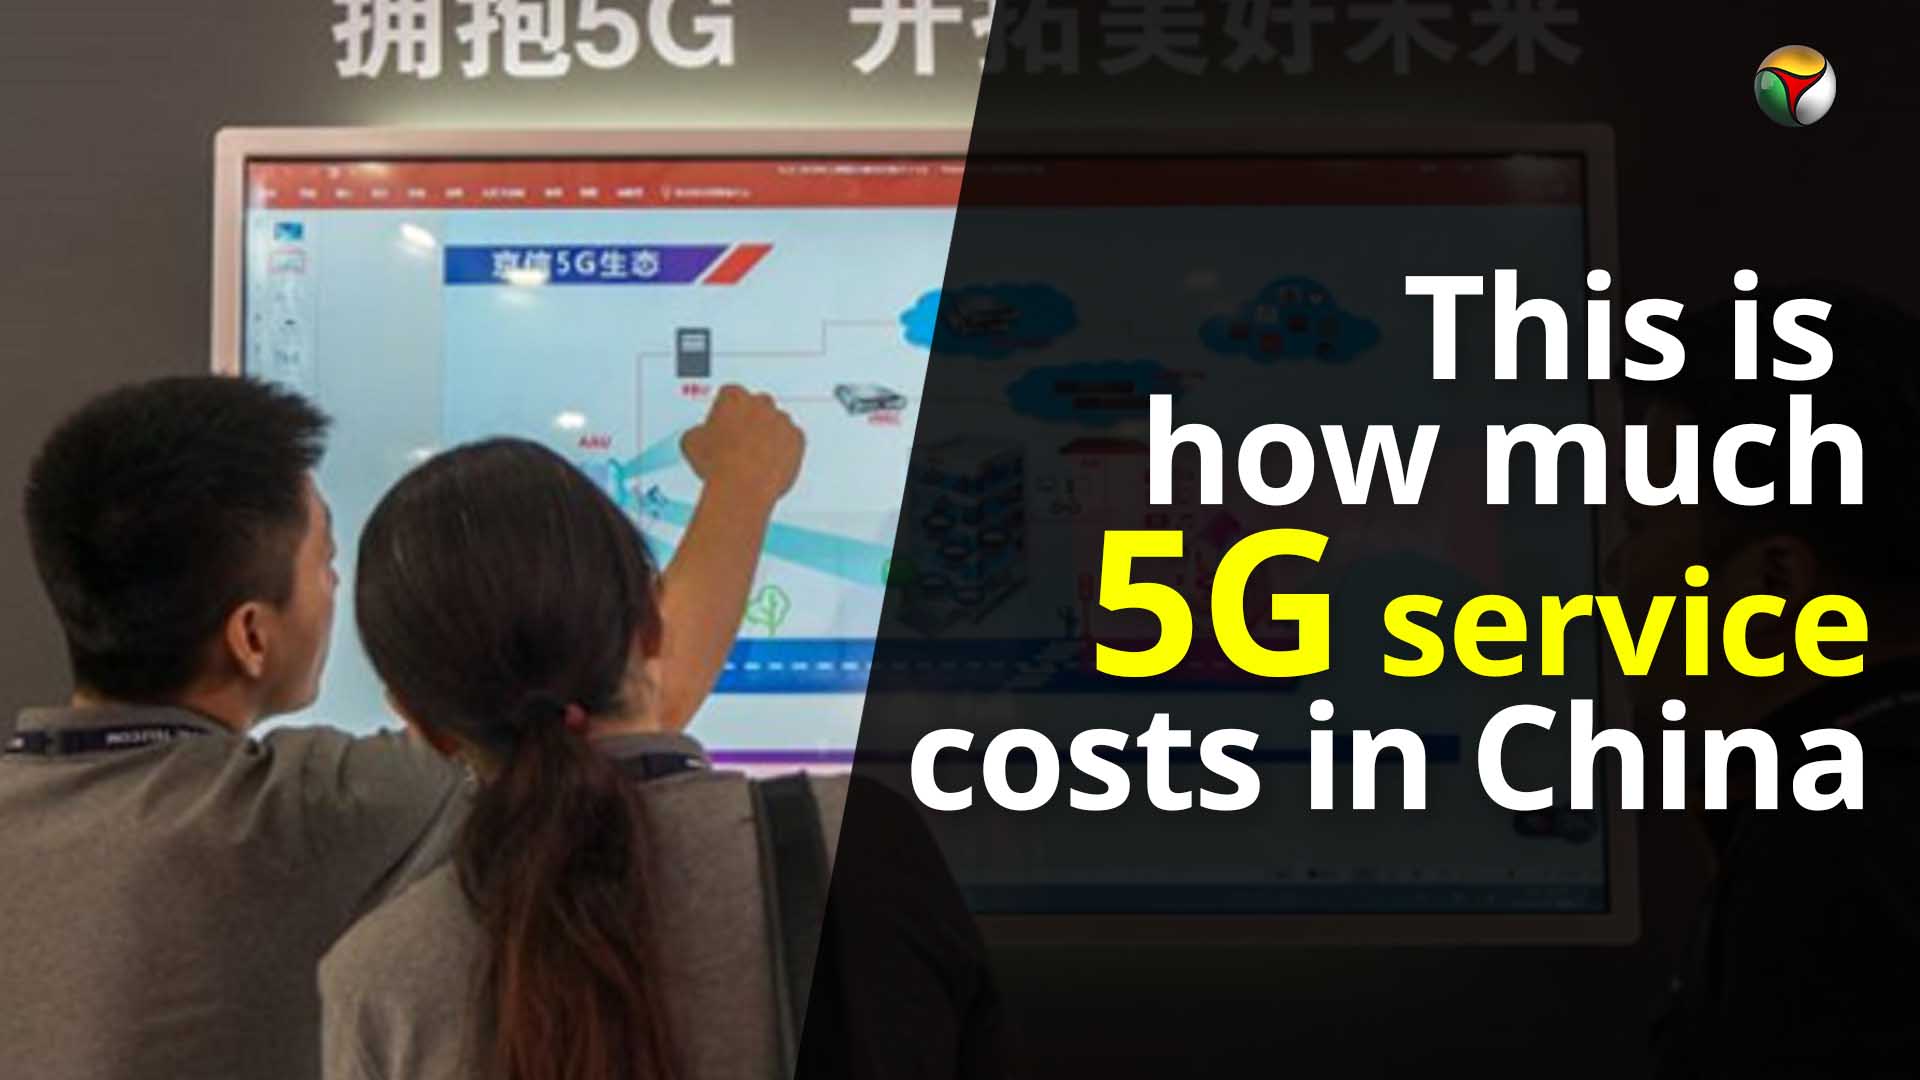 5G service commercially launched in China